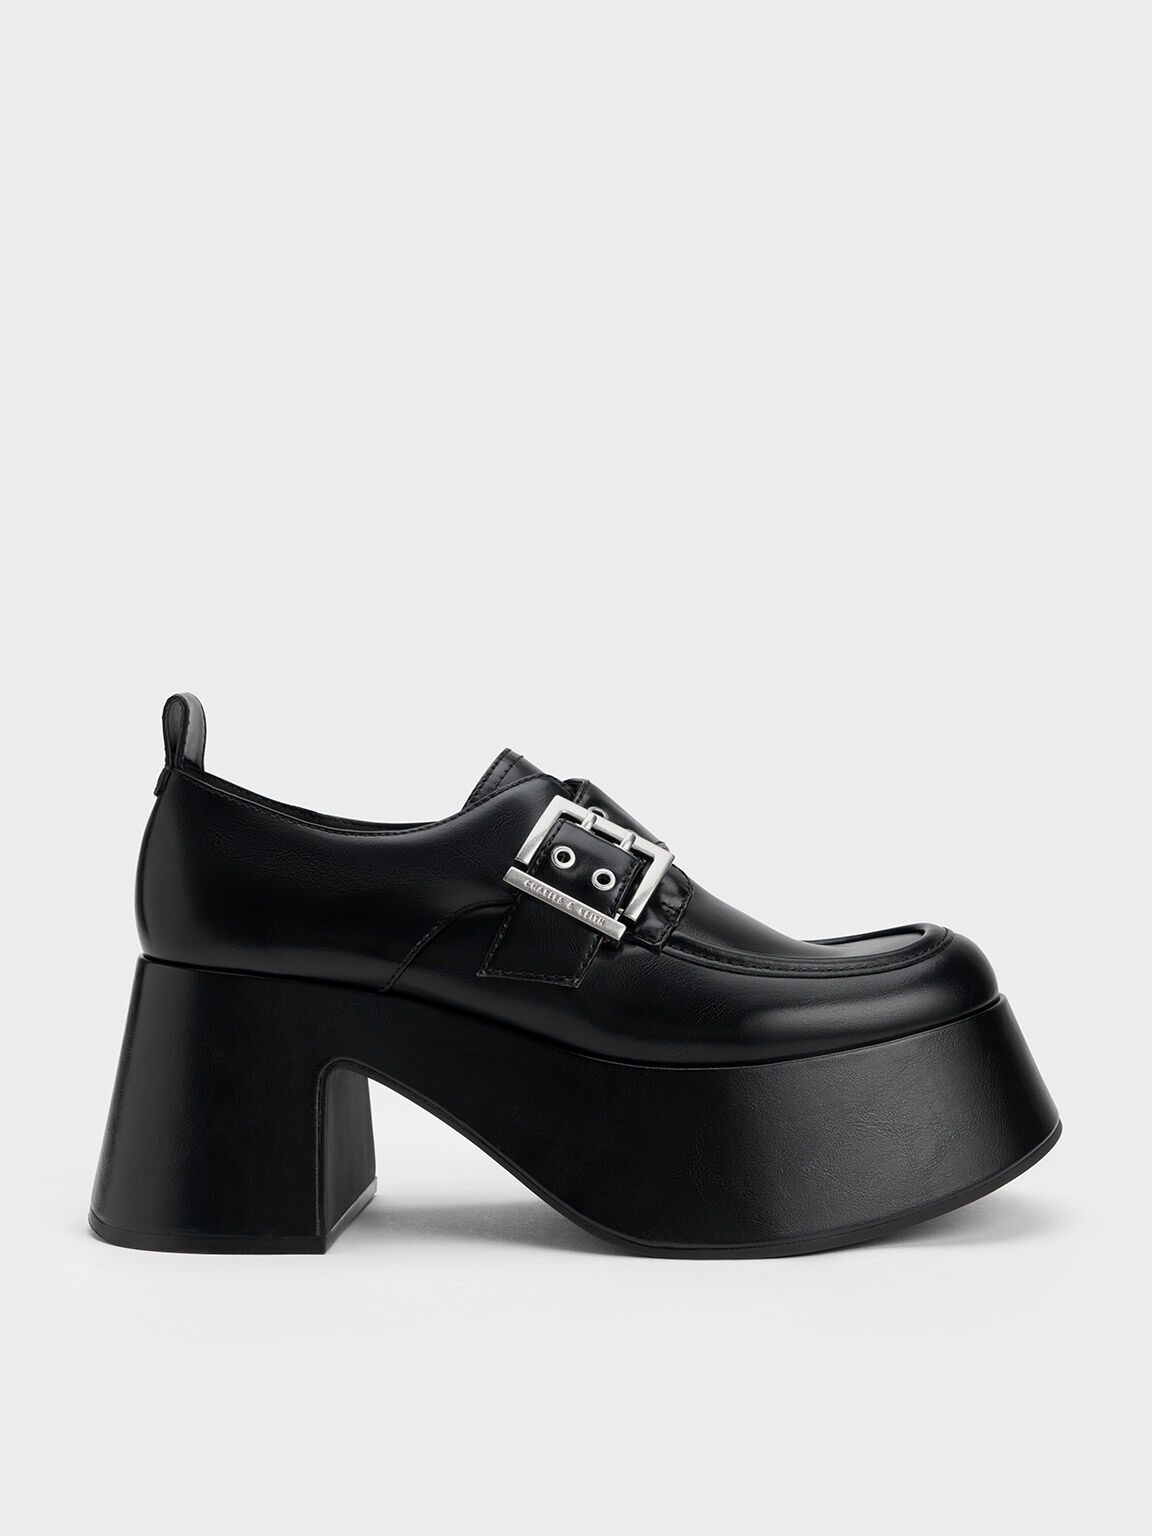 Women's Wedges | Shop Exclusives Styles | CHARLES & KEITH International